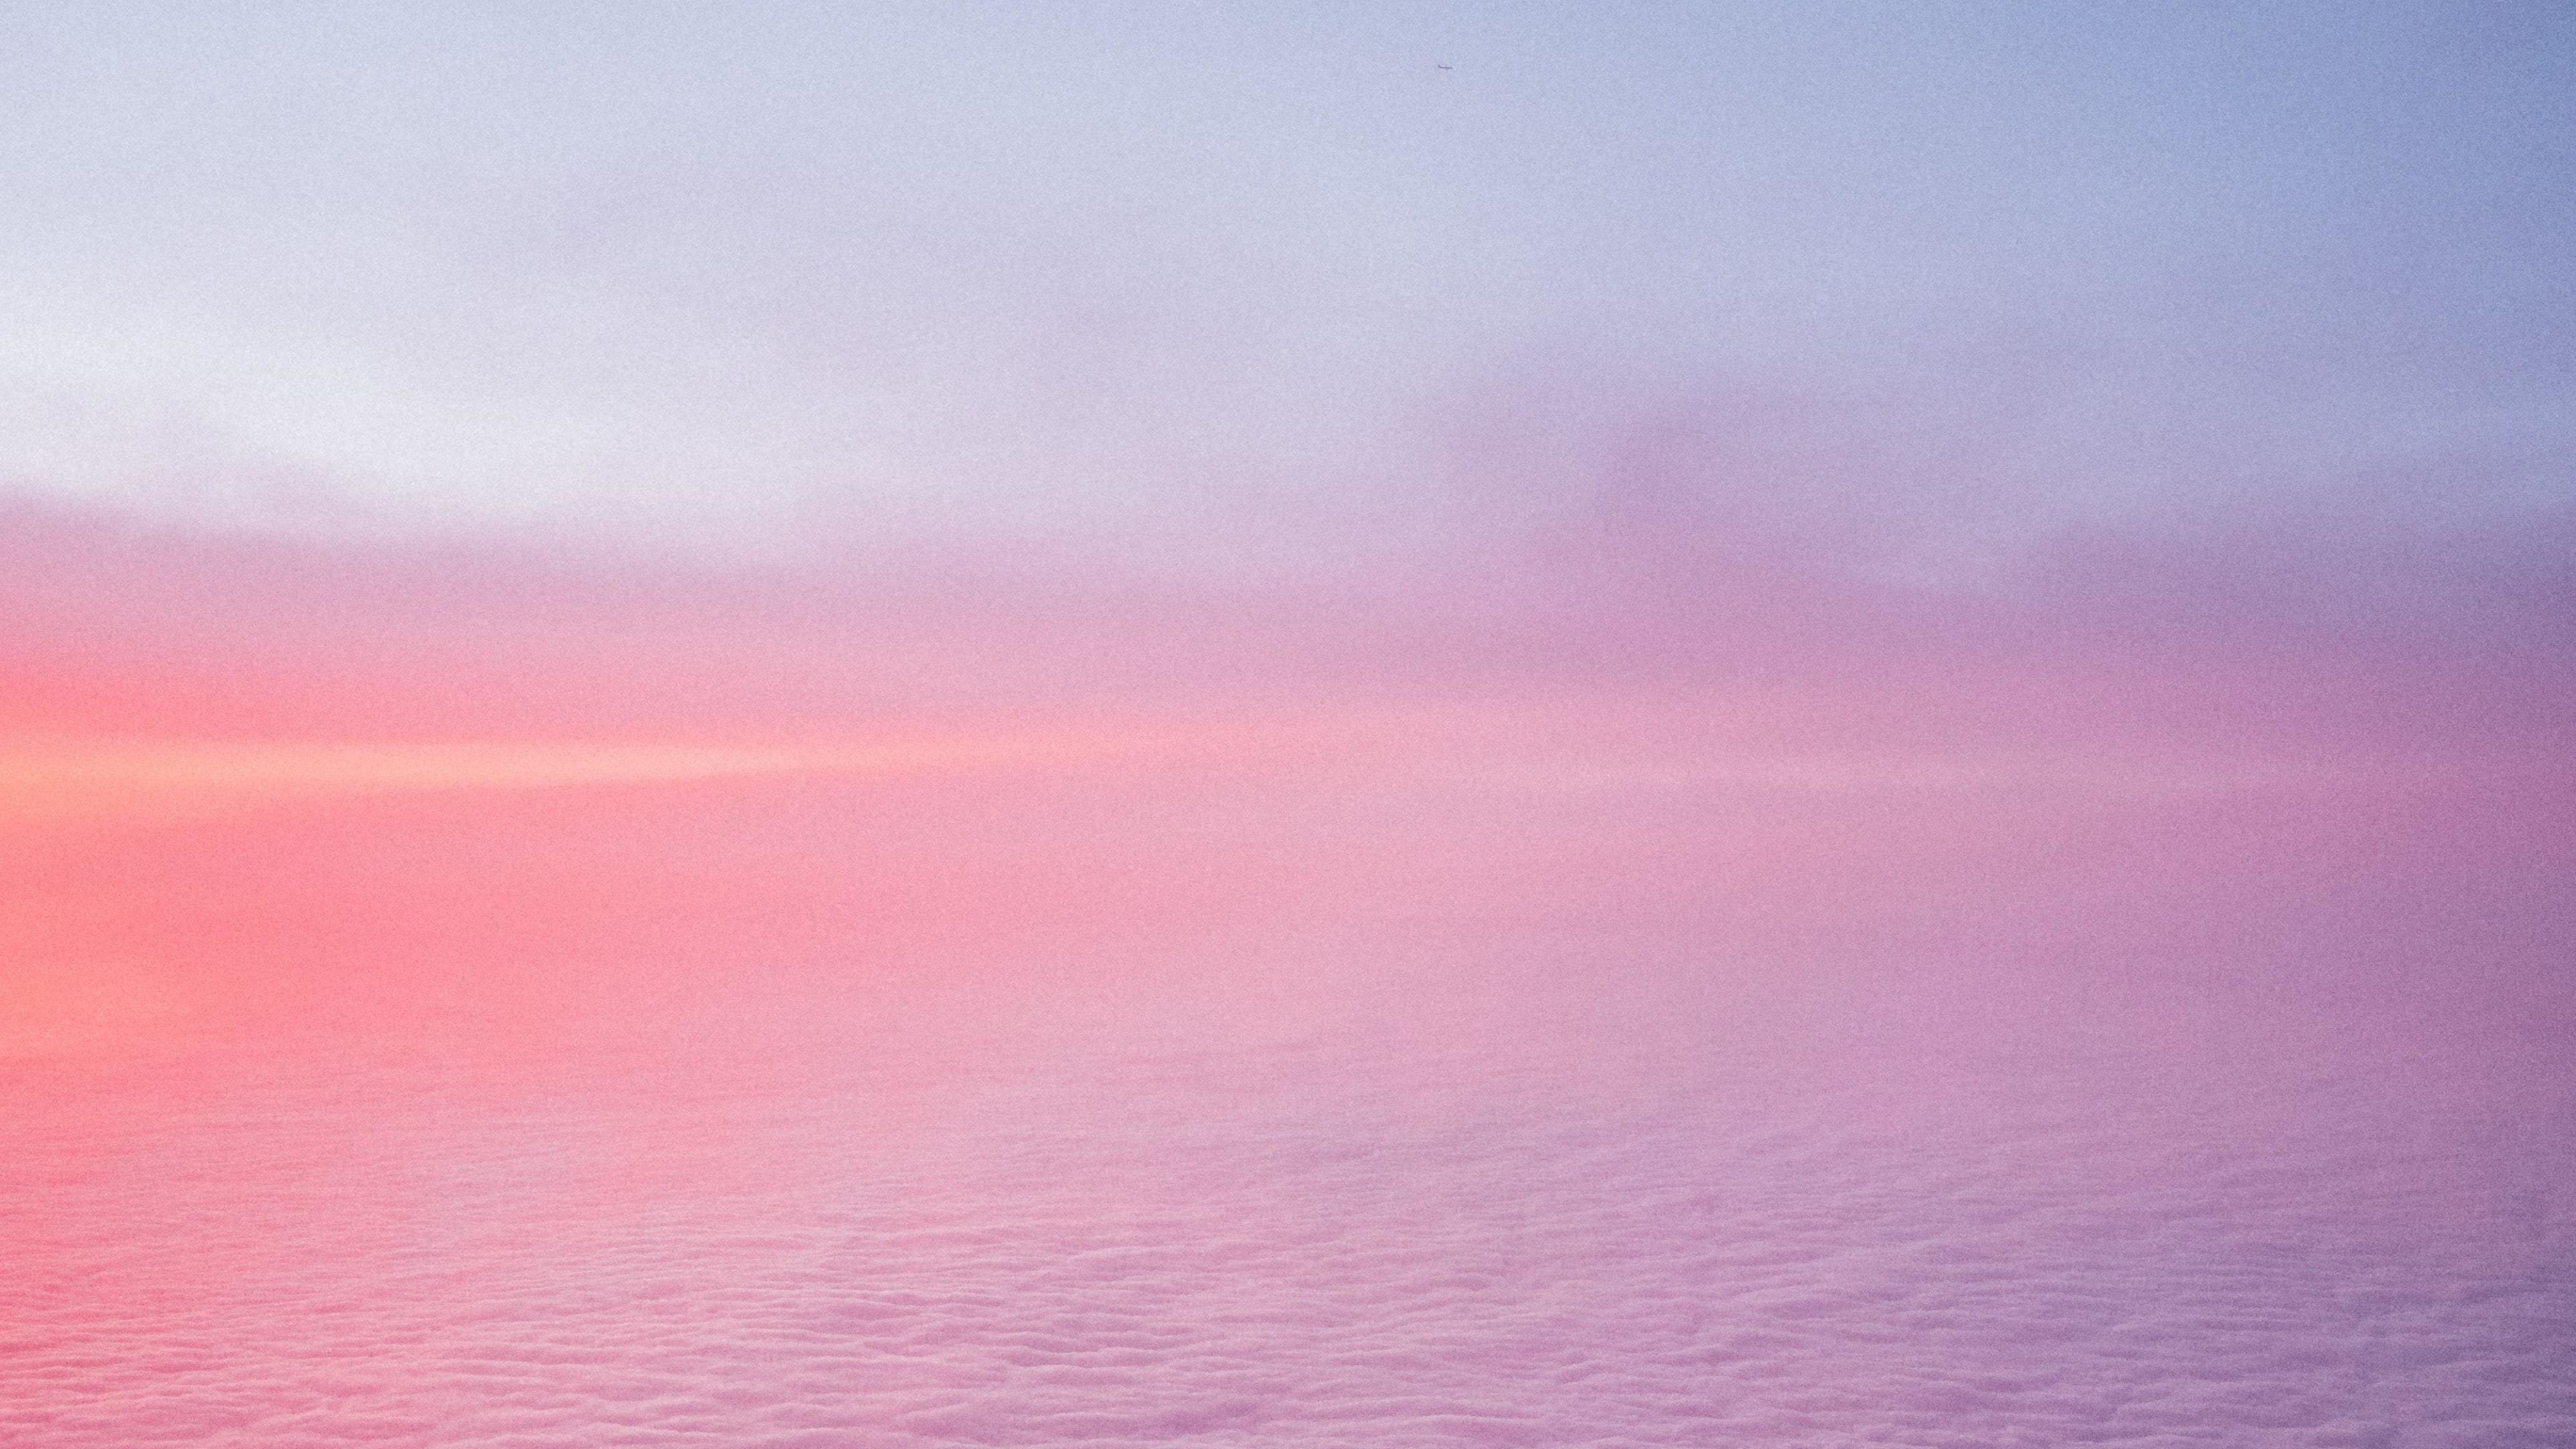 Download 3840x2160 wallpaper pinkish sky, clouds, 4k, uhd 16: widescreen, 3840x2160 HD image, background, 24459